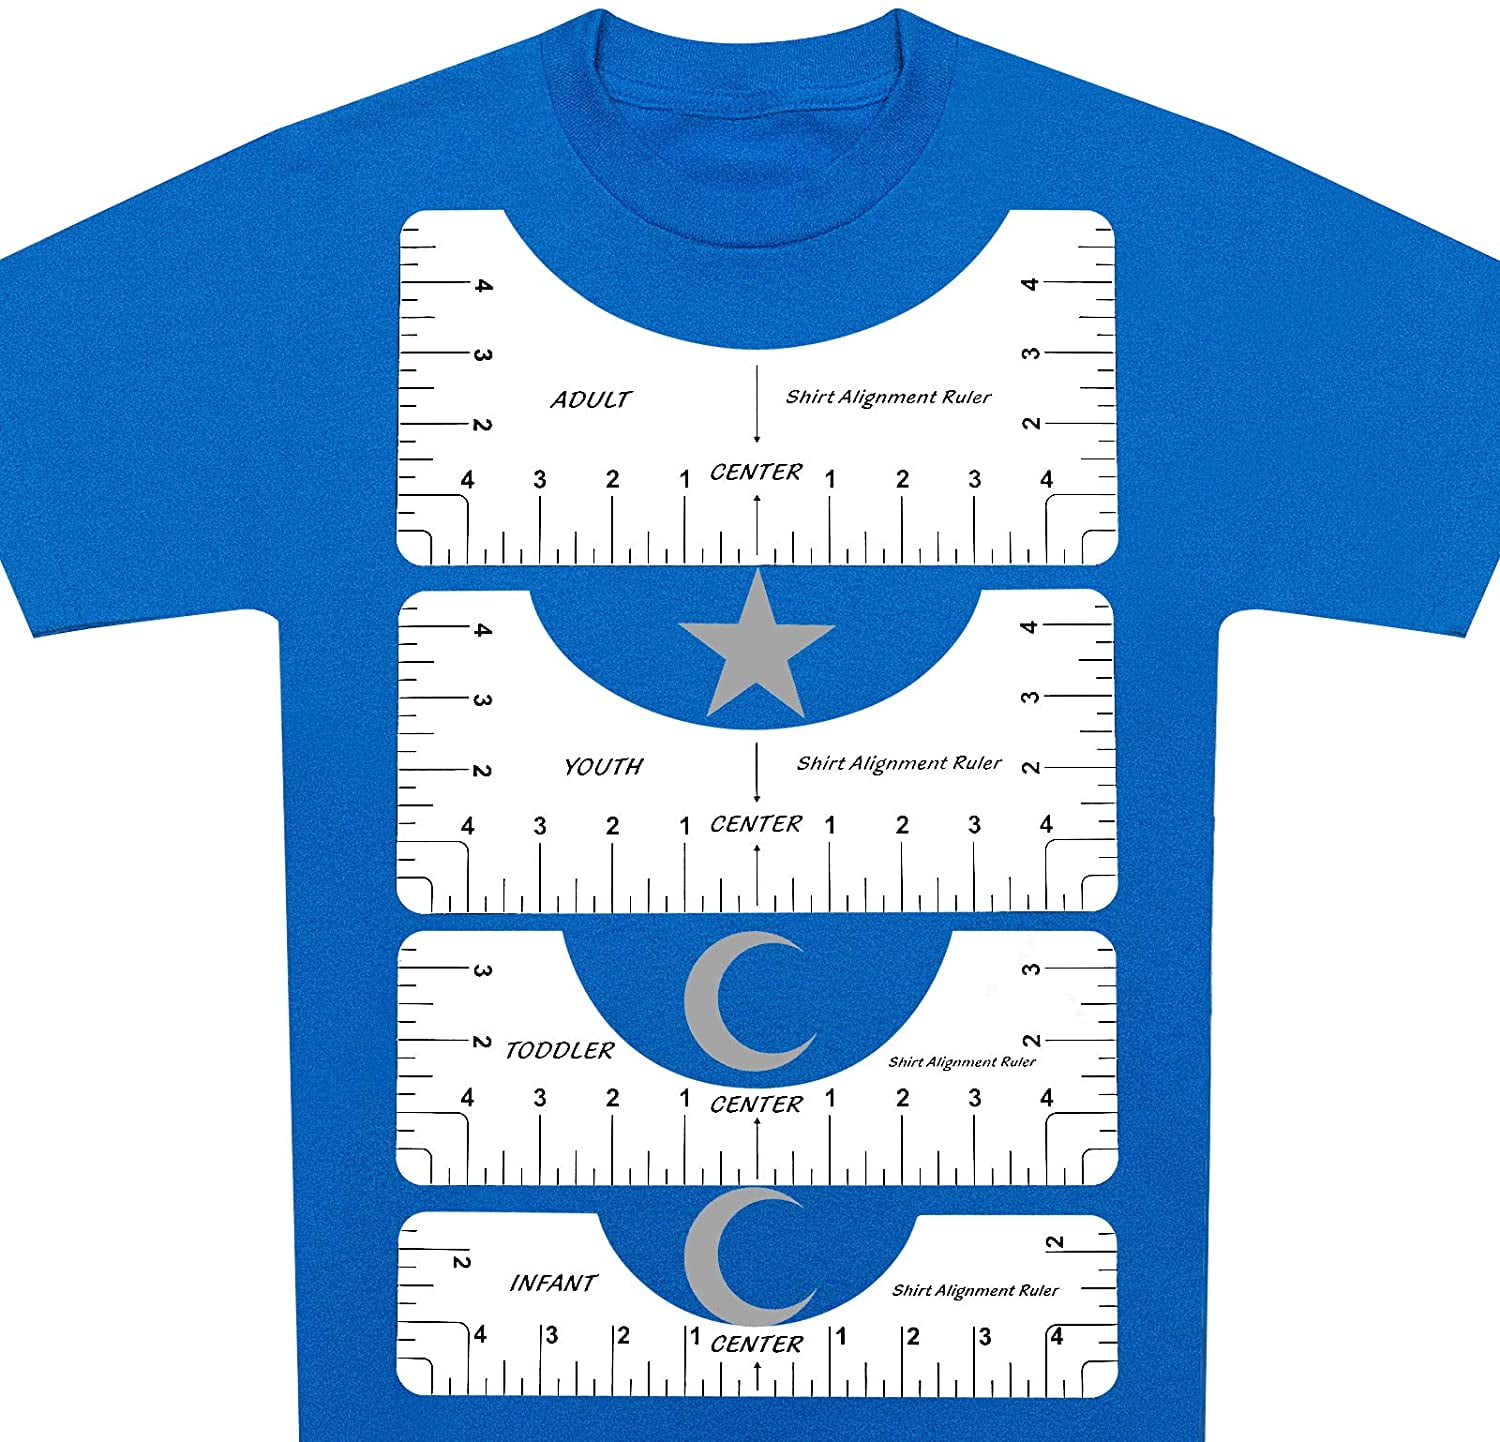 FINFINLIFE Tshirt Ruler Guide for Vinyl Alignment, Tshirt Ruler 11Pcs,  Shirt Ruler for Vinyl Alignment, Shirt Ruler, T Shirt Ruler, Tshirt  Alignment Tool for Children Youth Adult Front and Back - Coupon